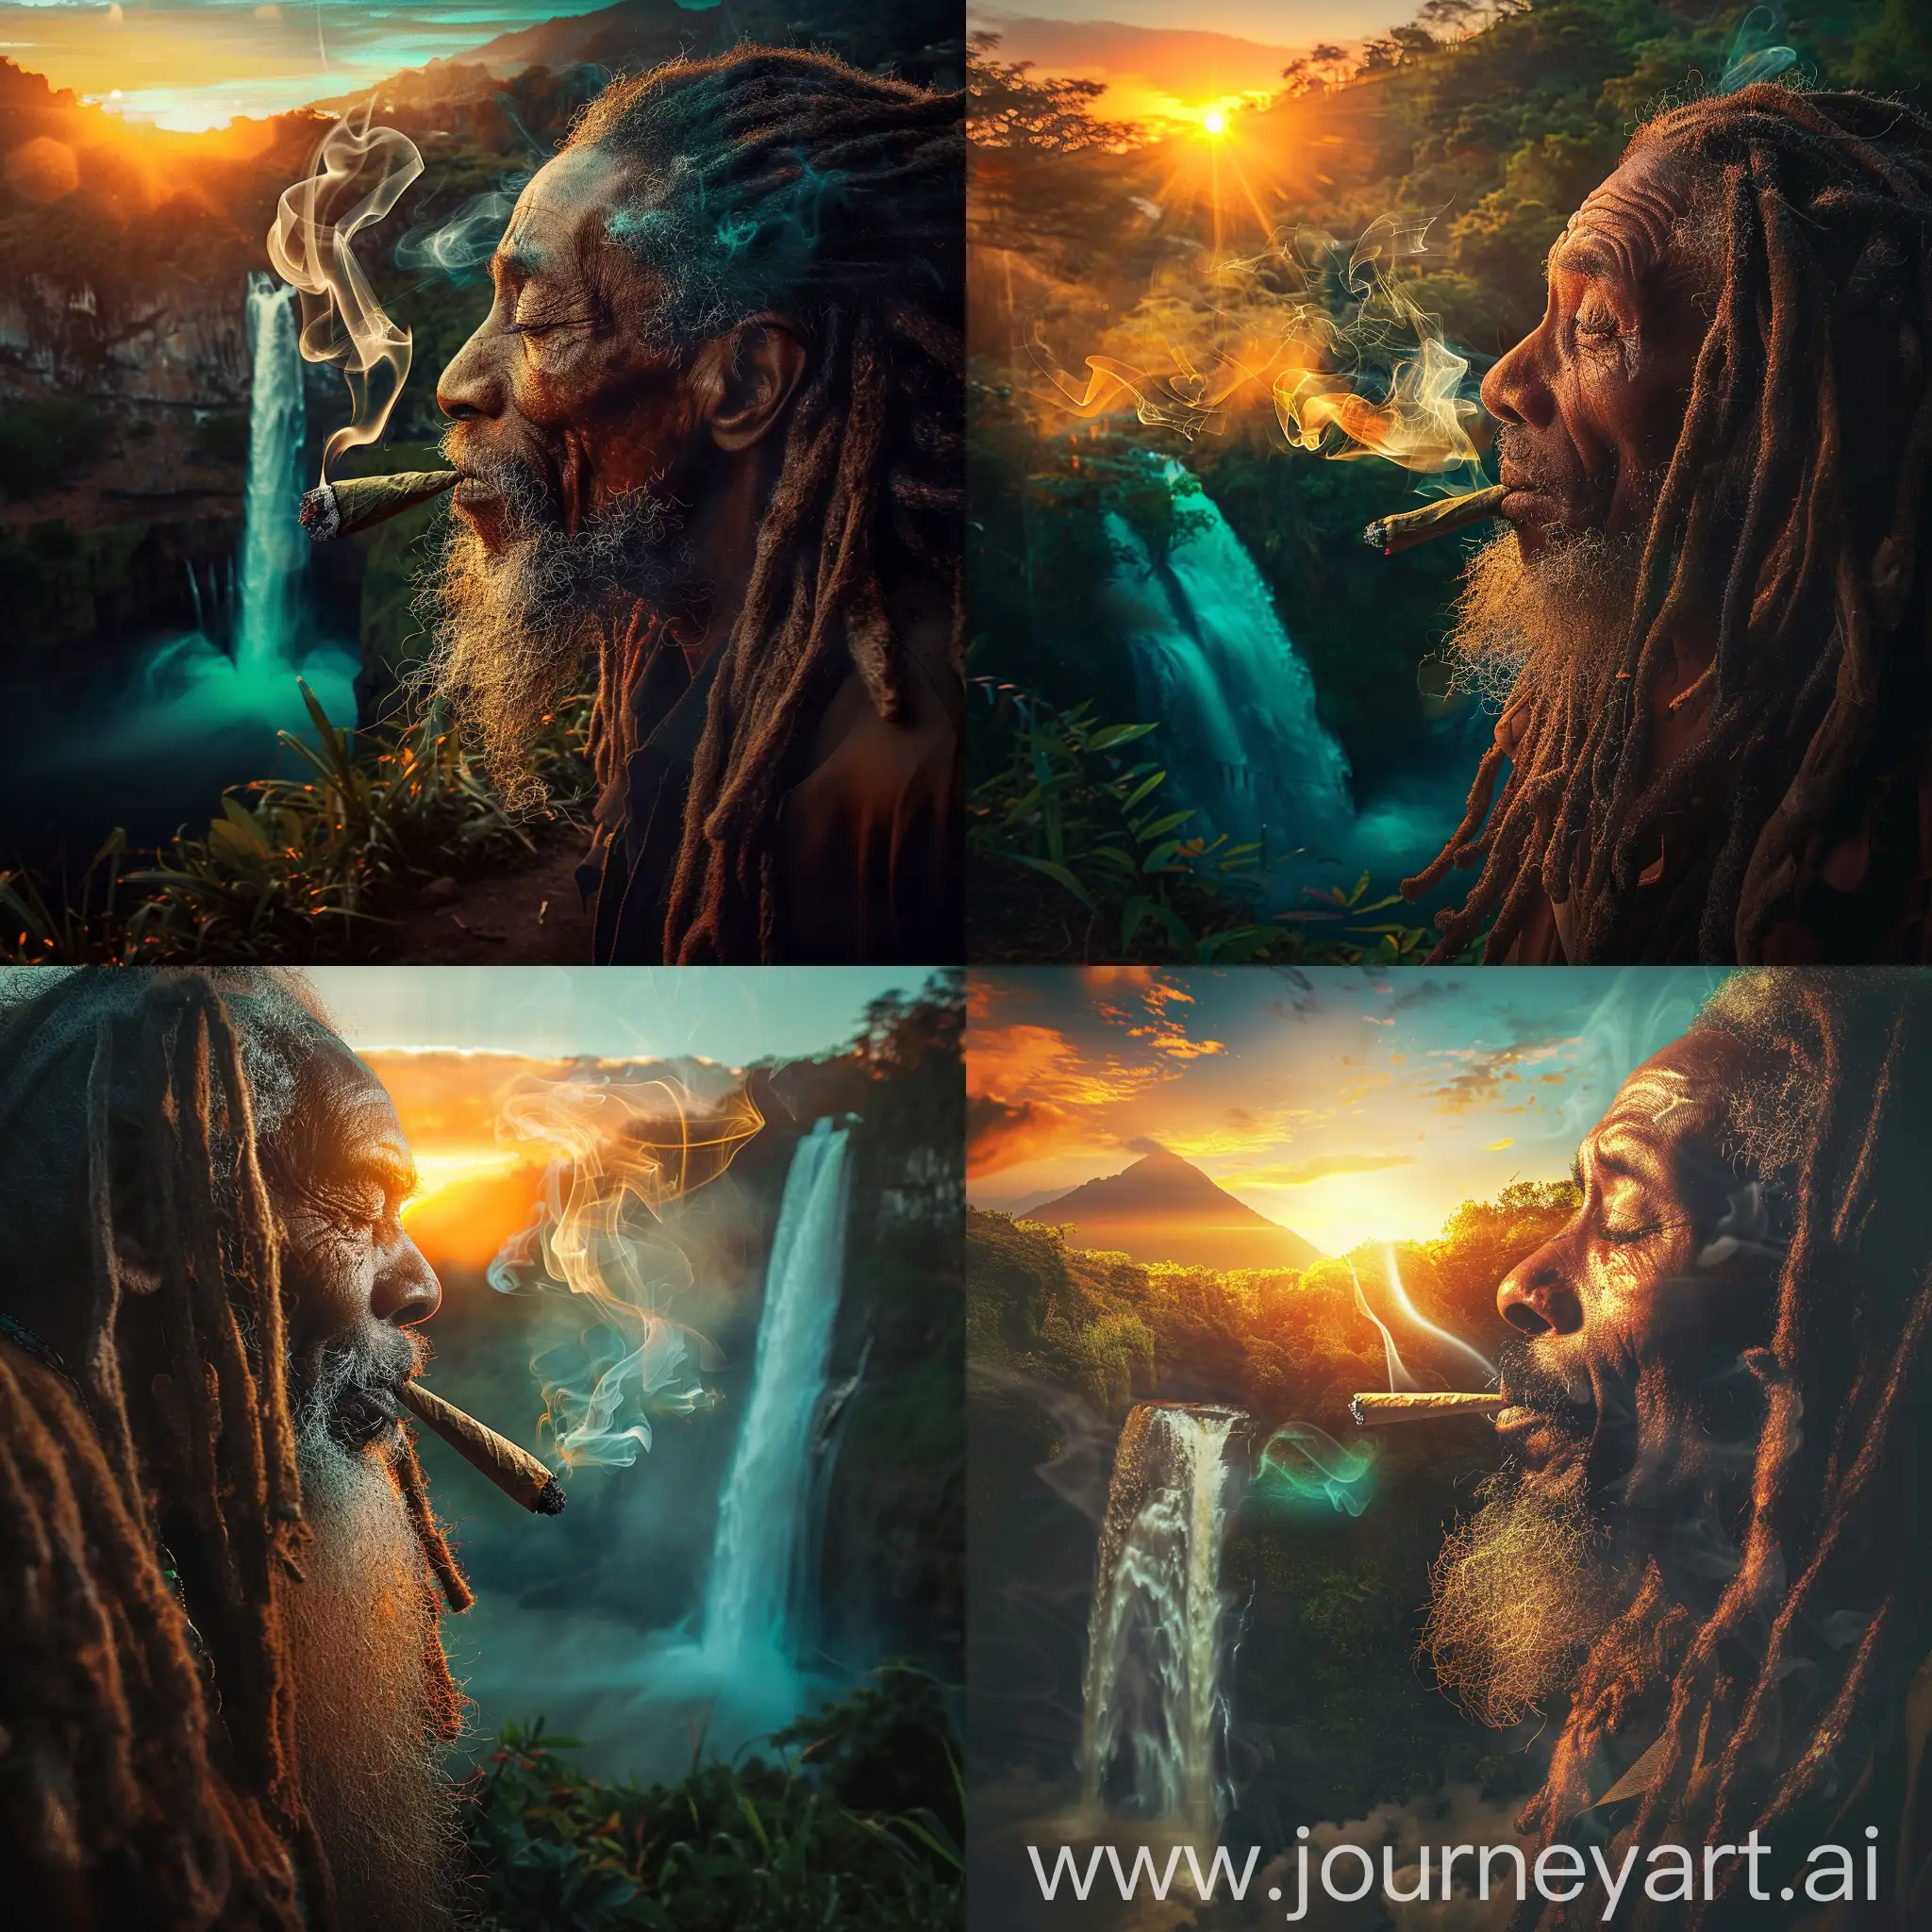 Photo an happy Old rastafari man with dreadlocks smoking a spliff in the Jamaican hills by a waterfall at sunset. his face is lit from the side, the smoke is glowing from the sunset. his facial contours are well defined by shadows

The only colours are brown, green, orange and blue